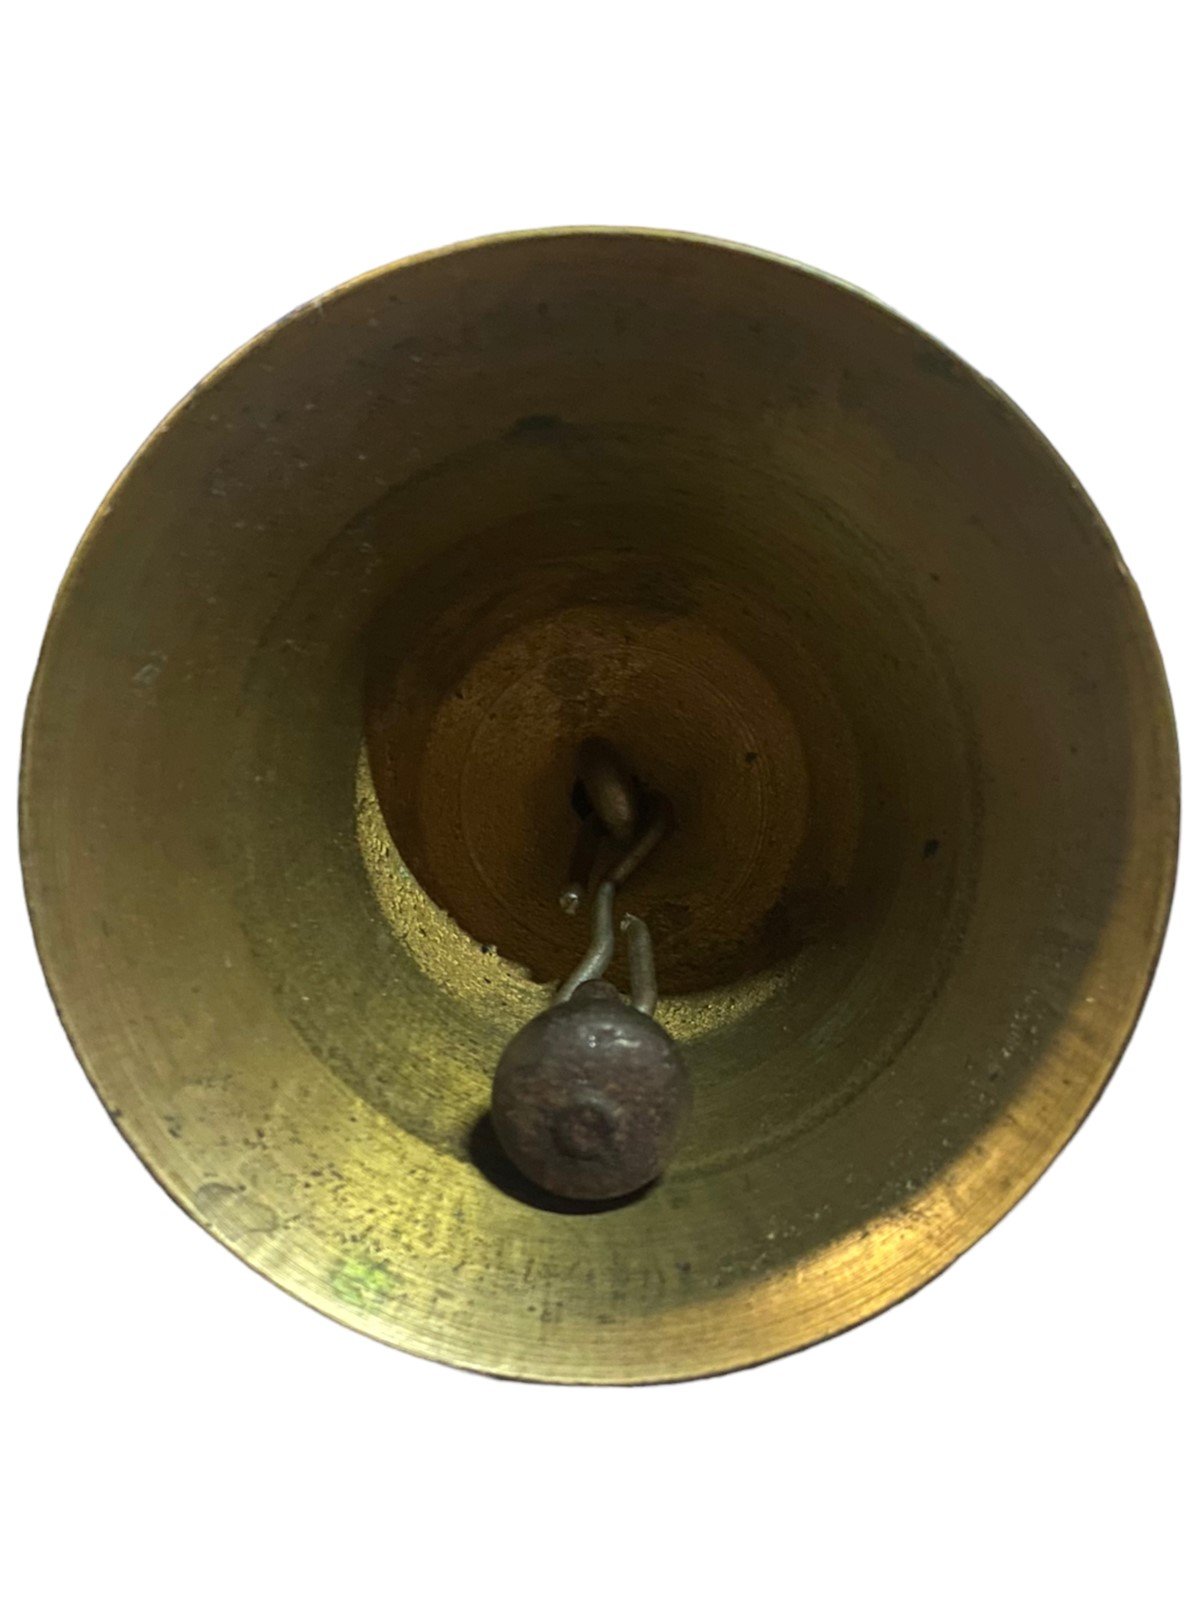 Brass School Bell With Metal Ball and Wood Handle Antique